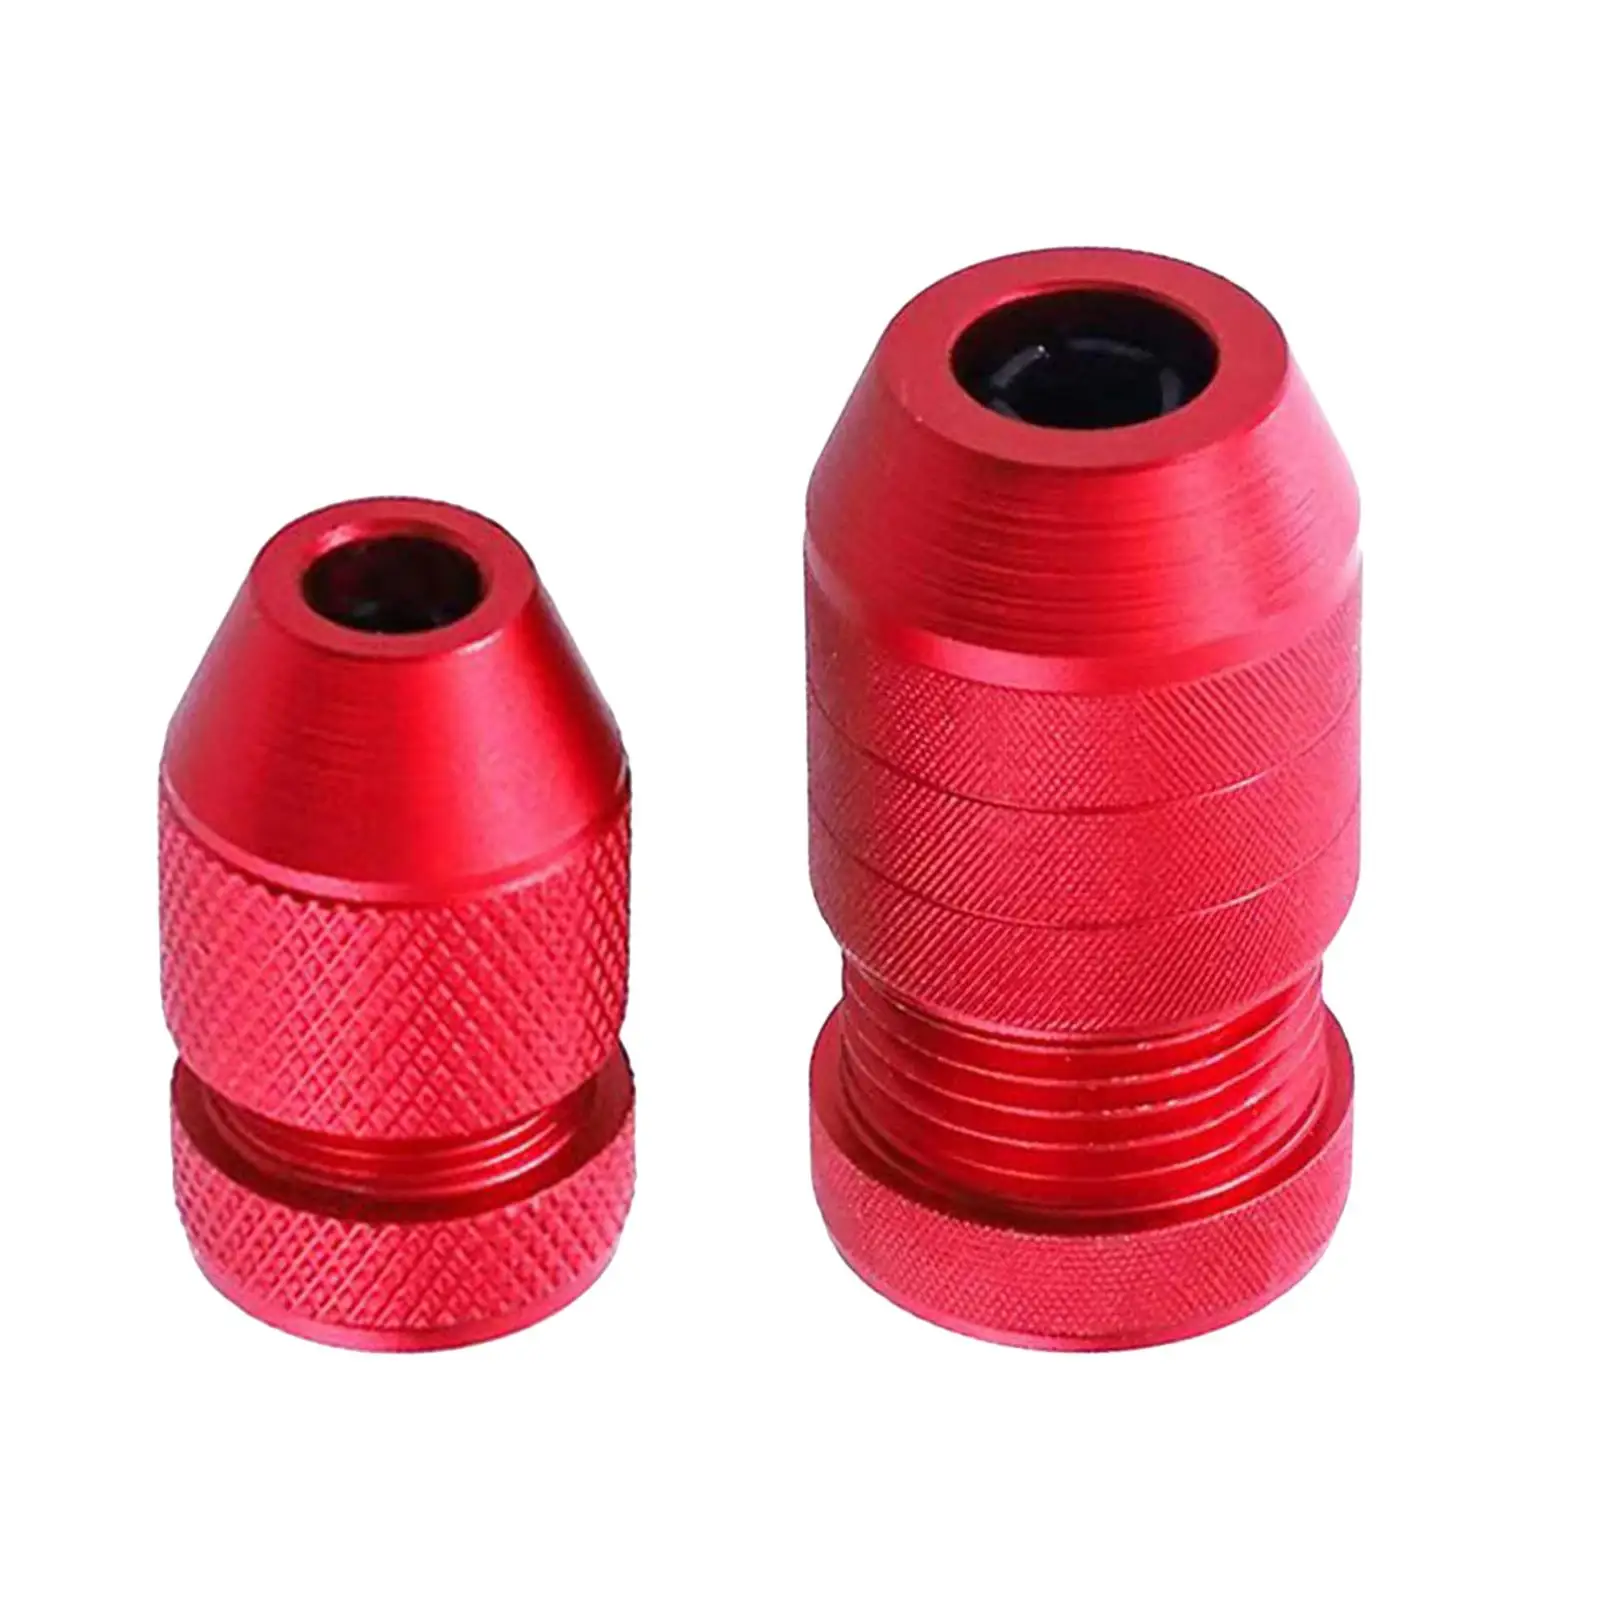 Professional Drill Depth Stop Consistent Drilling Carpentry Accessories Adjustable Measuring Tool Limit Rings for Drilling